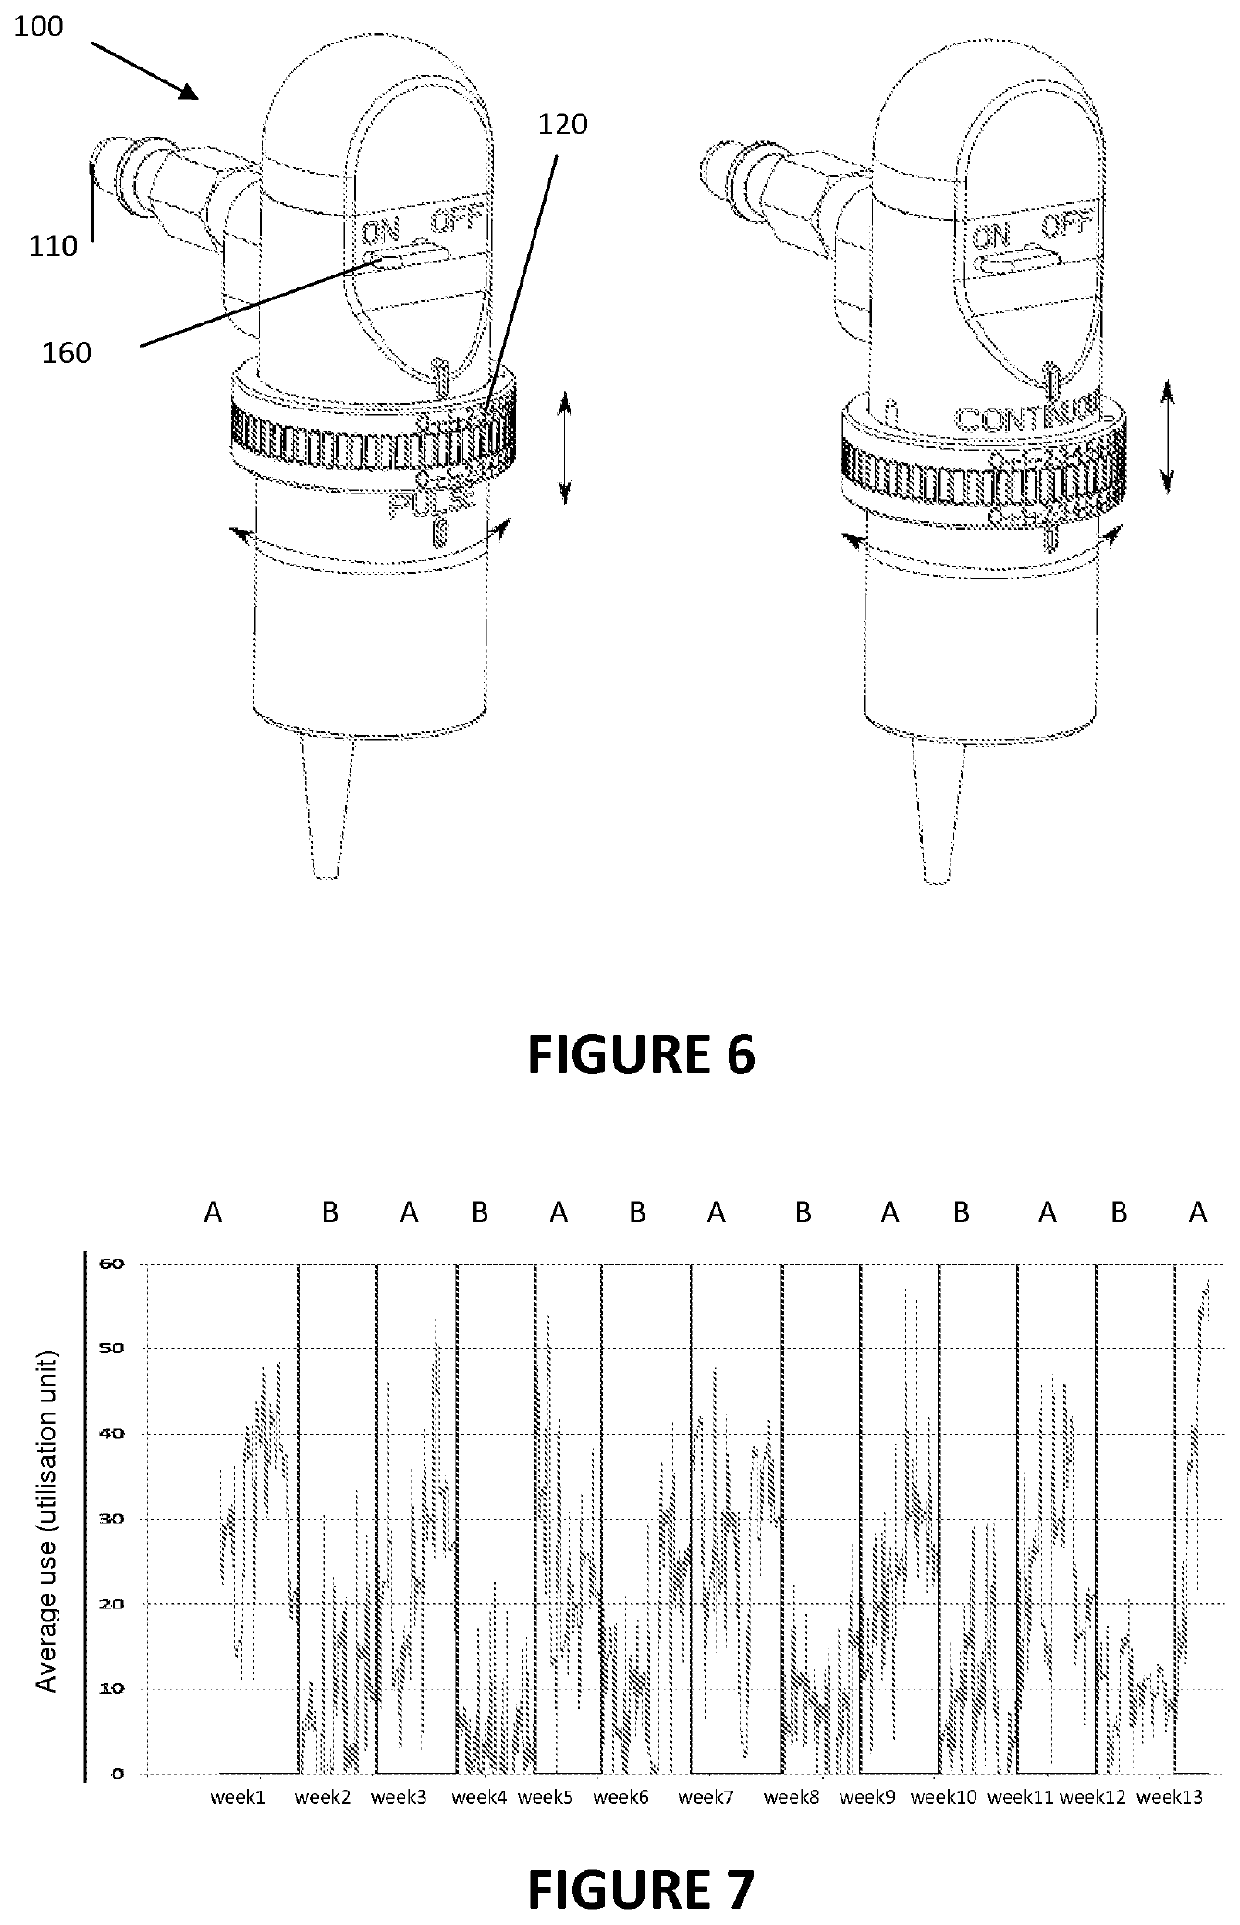 Valve for controlling gas flow